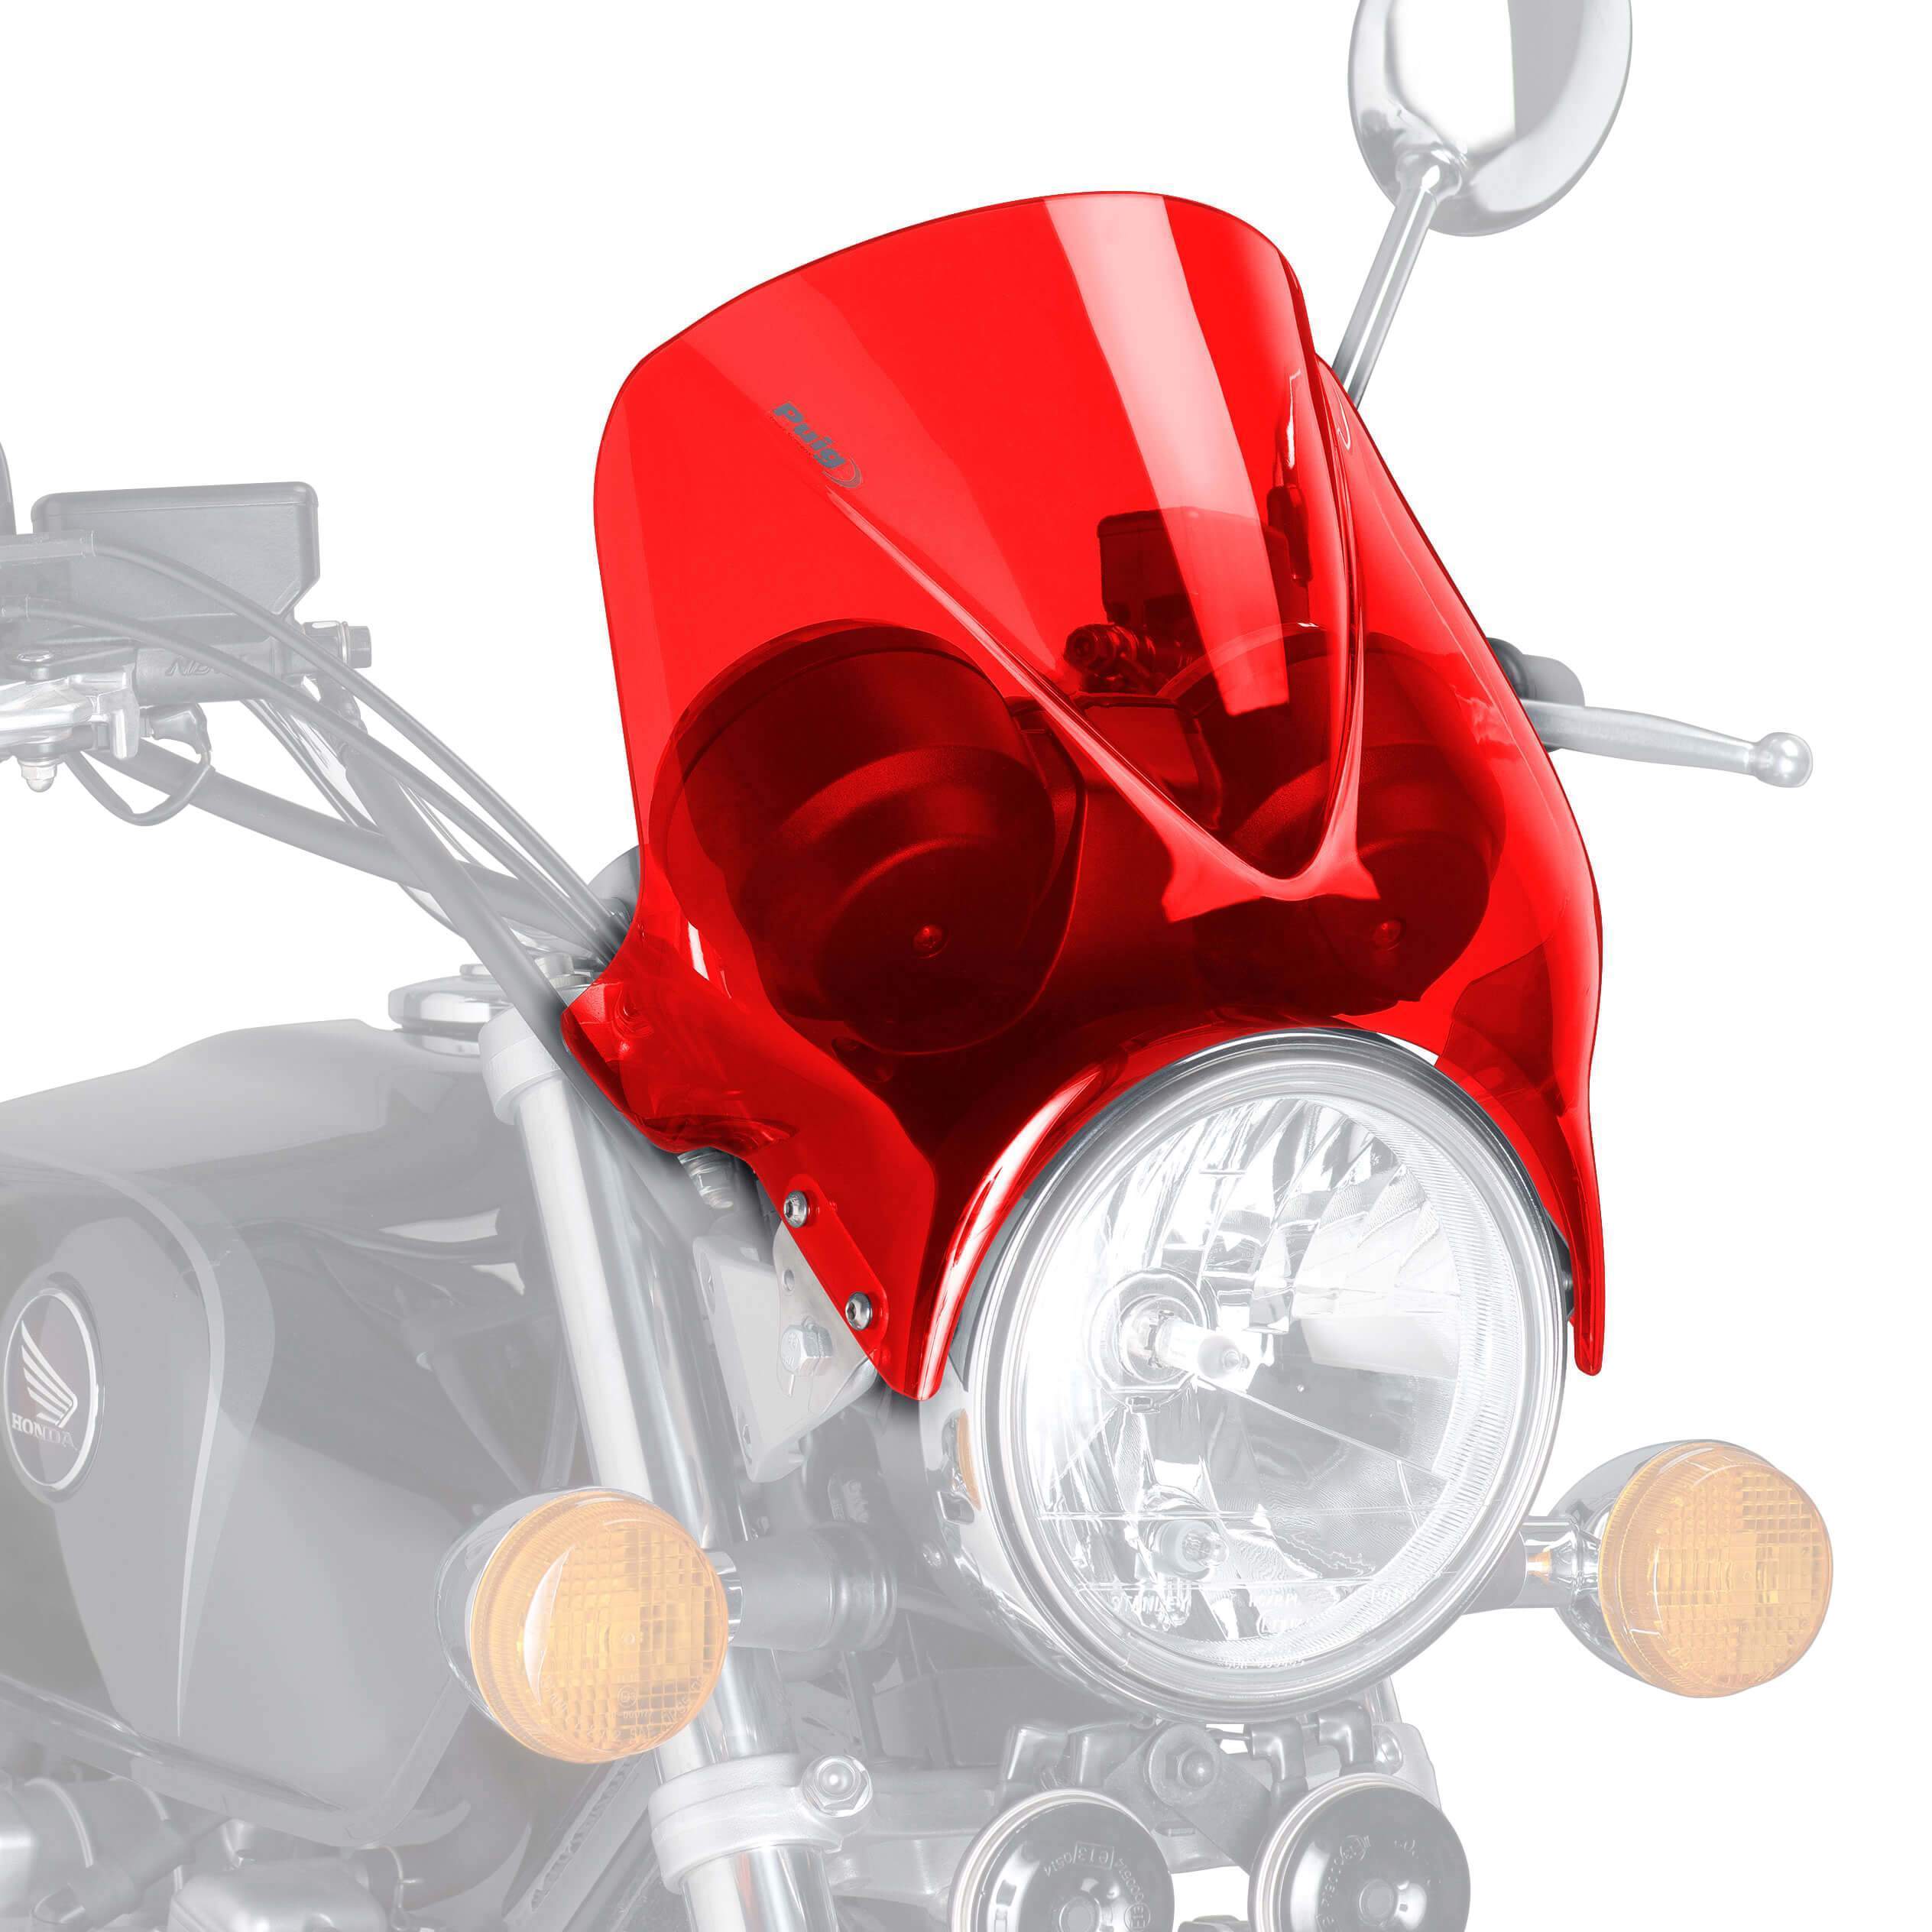 Puig Windy Screen | Red | Triumph Thunderbird Sport 1998>2004-M1482R-Screens-Pyramid Motorcycle Accessories